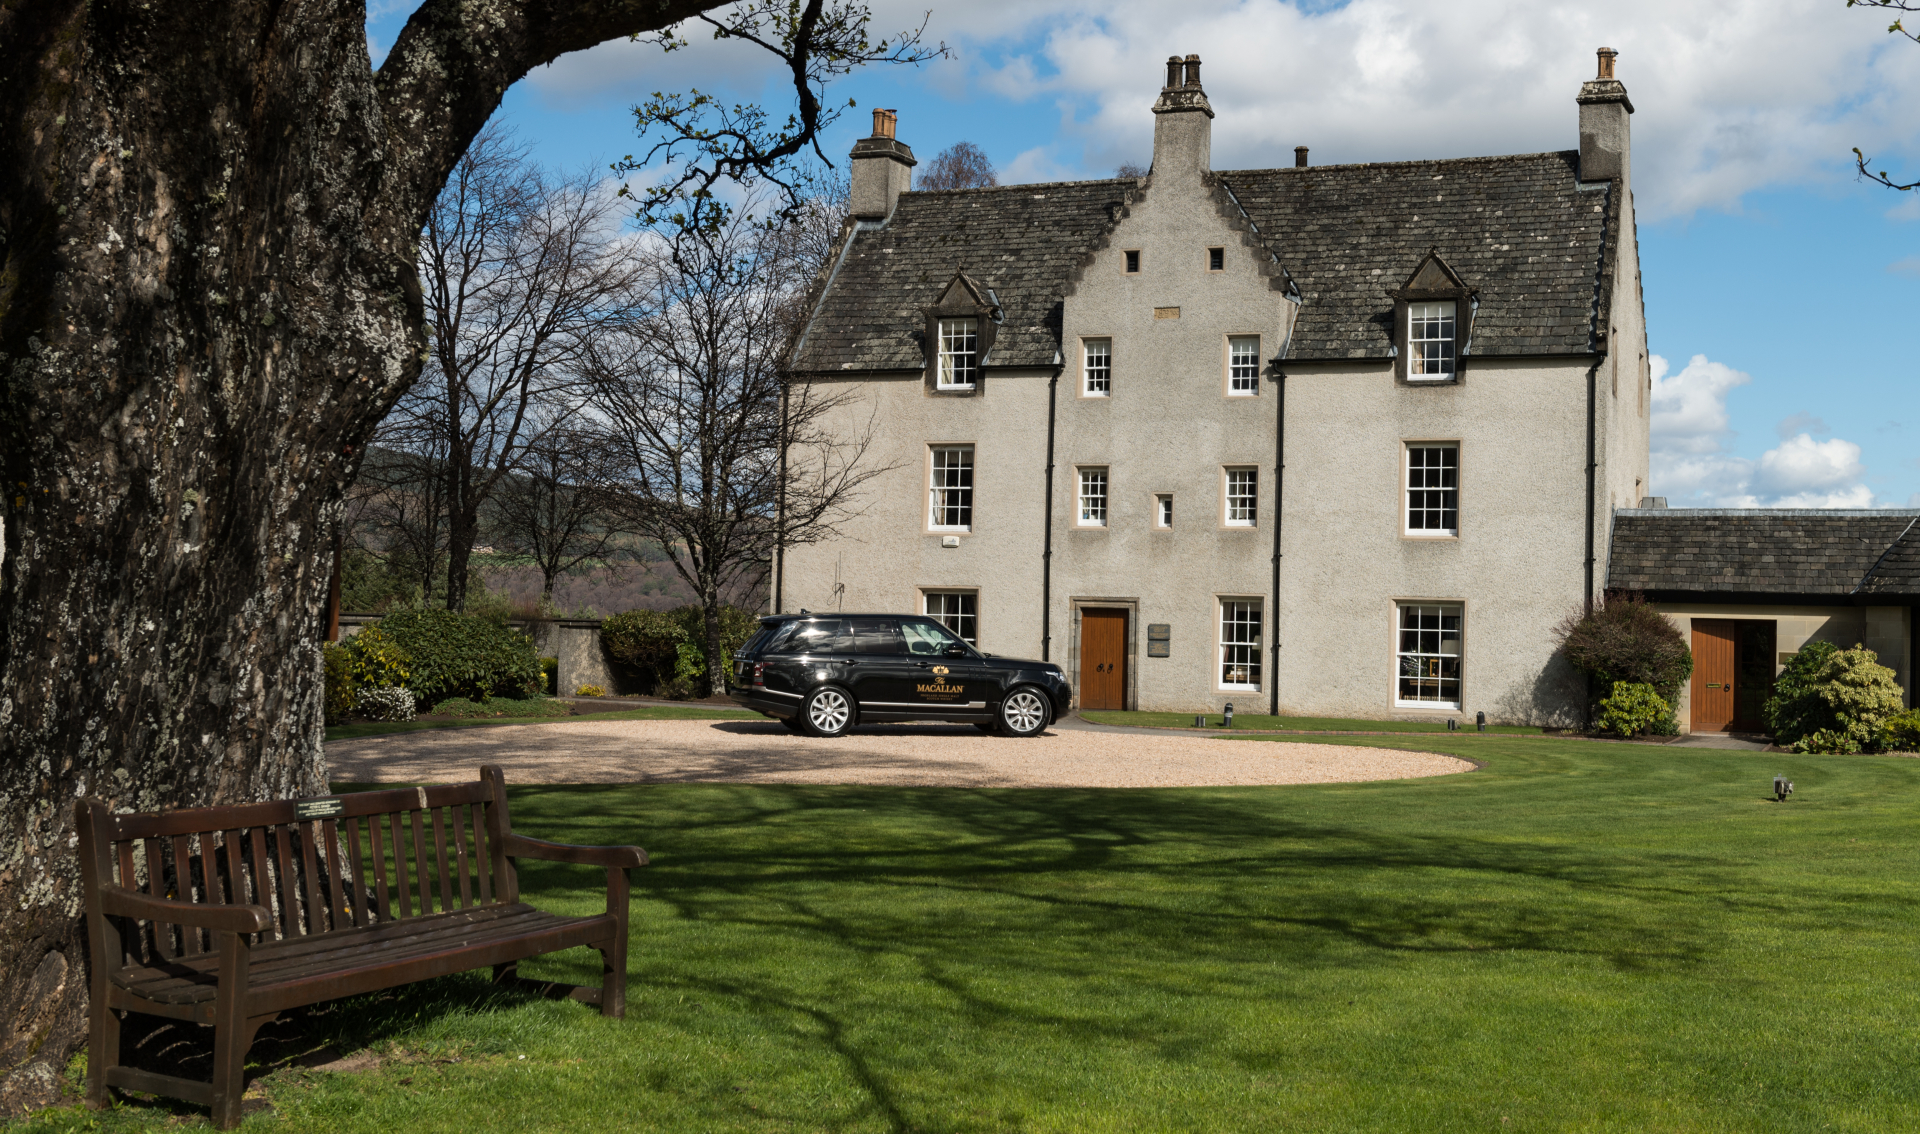 The Macallan Estate is as fundamental as it was in 1824 when the distillery was first registered. Photo credit Ian Gavan.